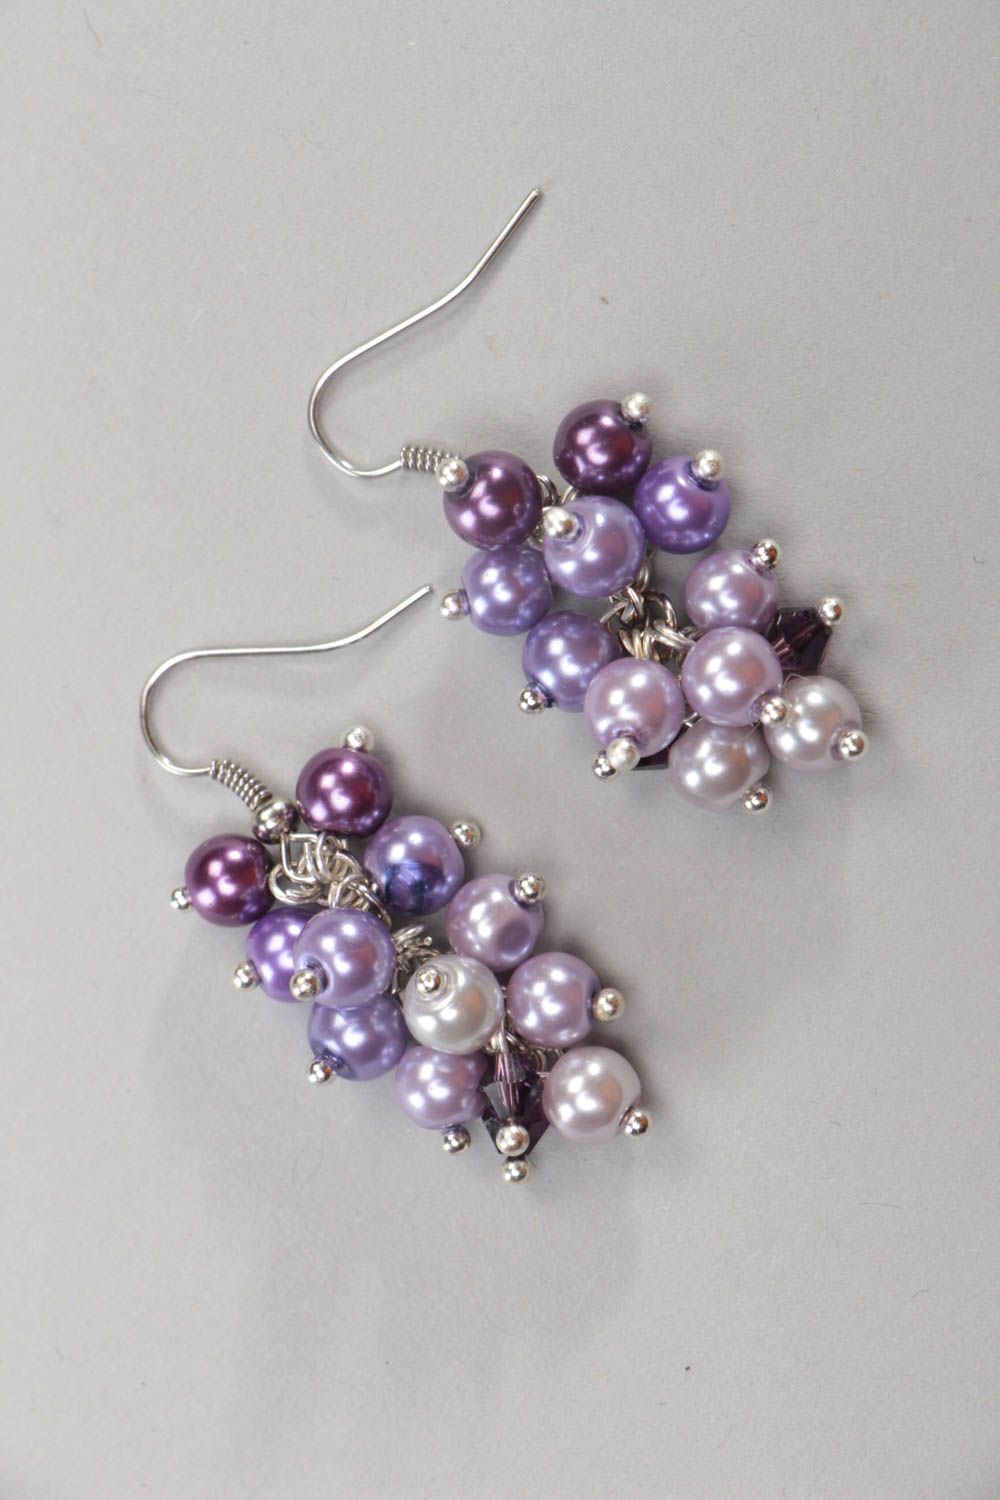 Handmade designer earring accessory made of ceramic pearls lilac jewelry photo 2